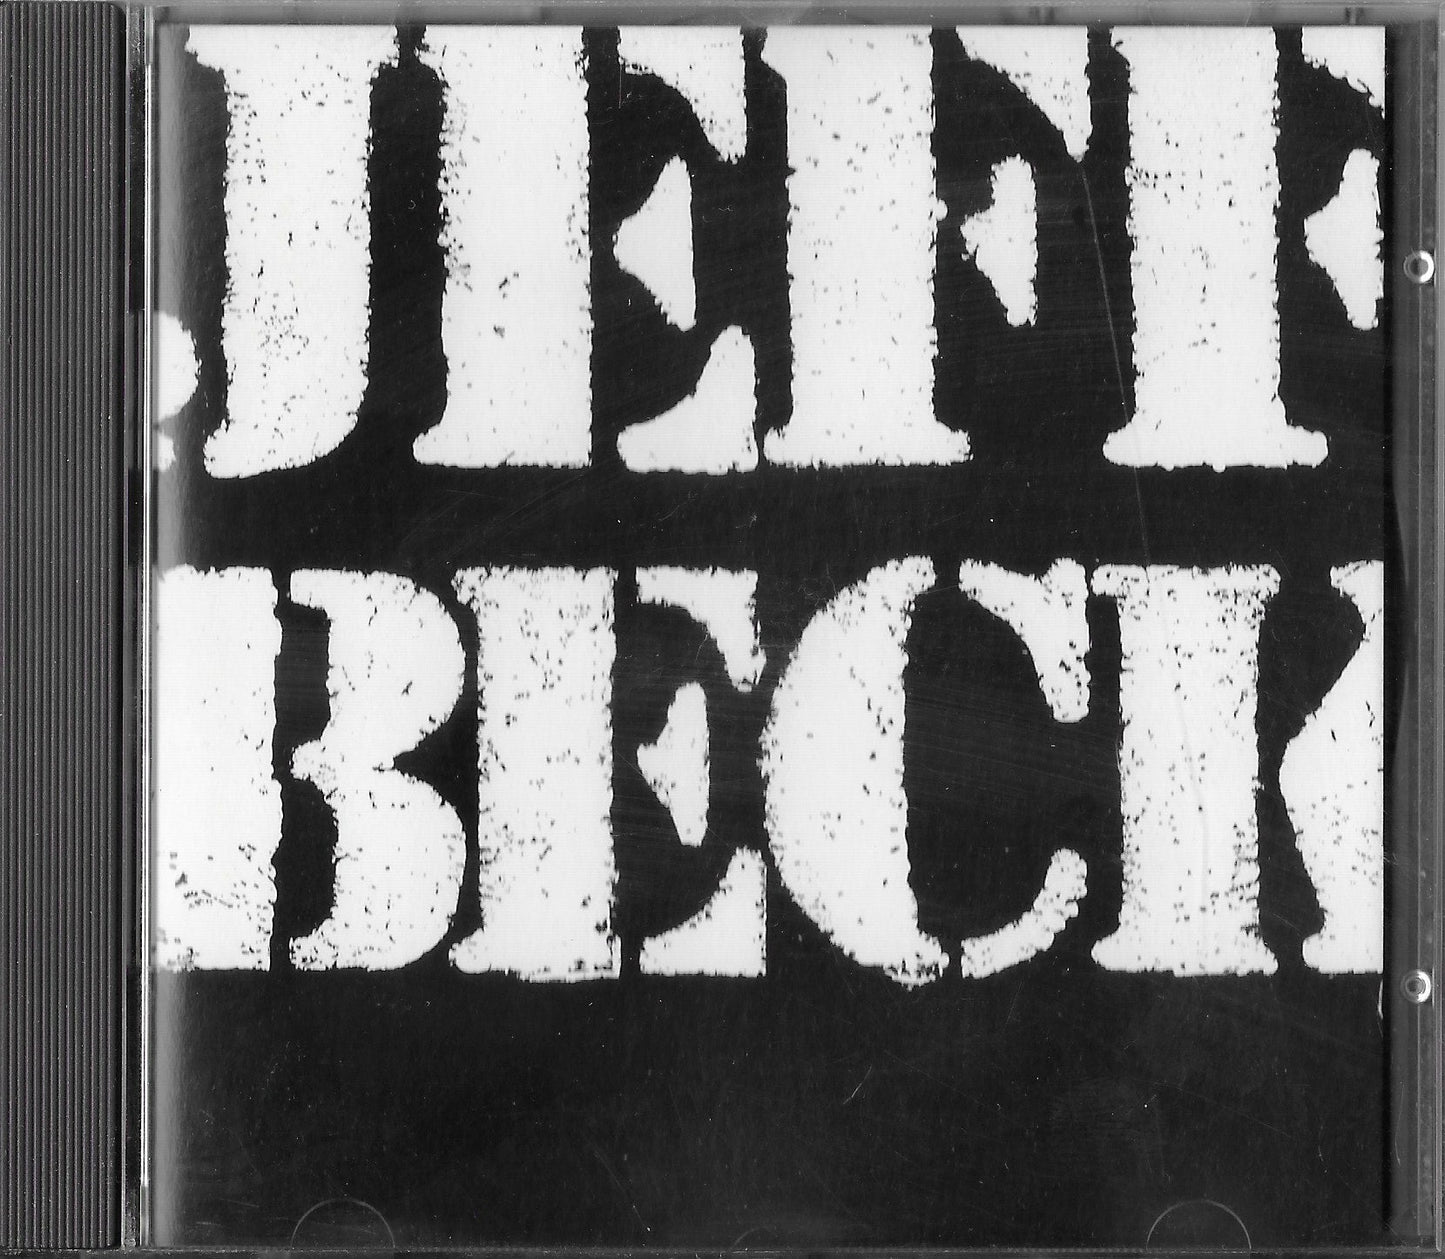 JEFF BECK - There And Back